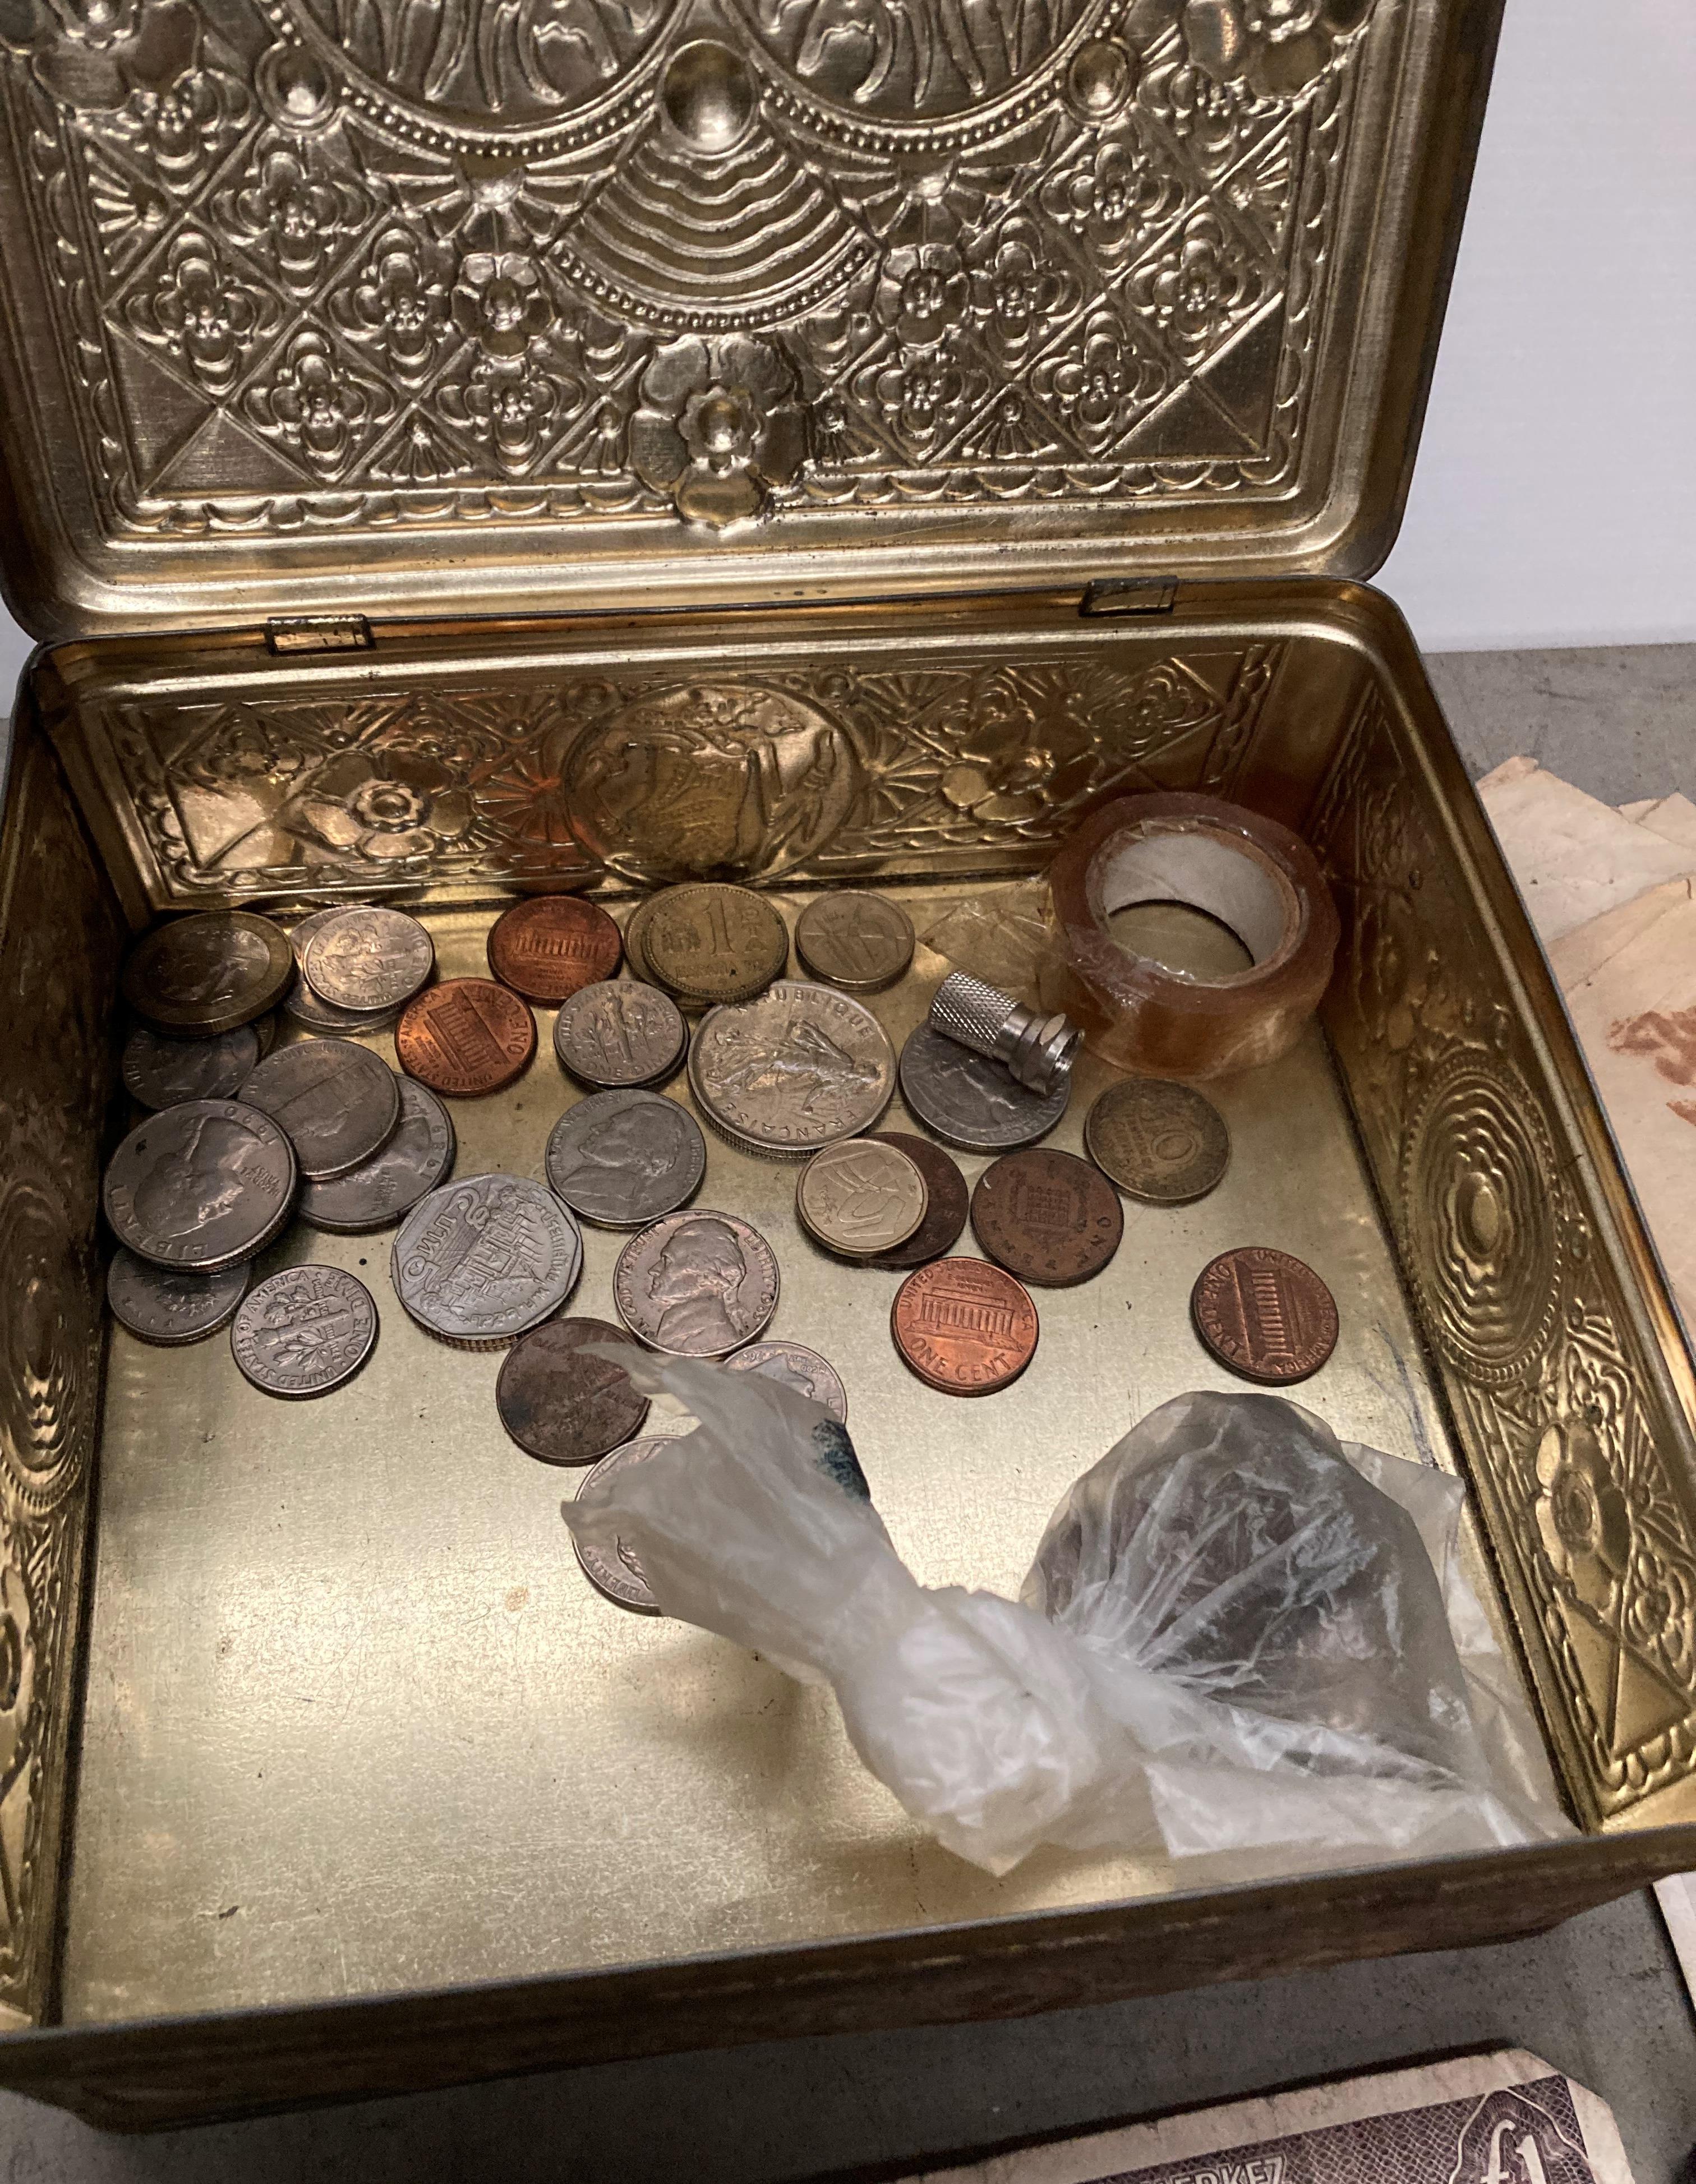 Contents to tin - assorted bank notes, coins, postcards, including USA $1, - Image 4 of 4